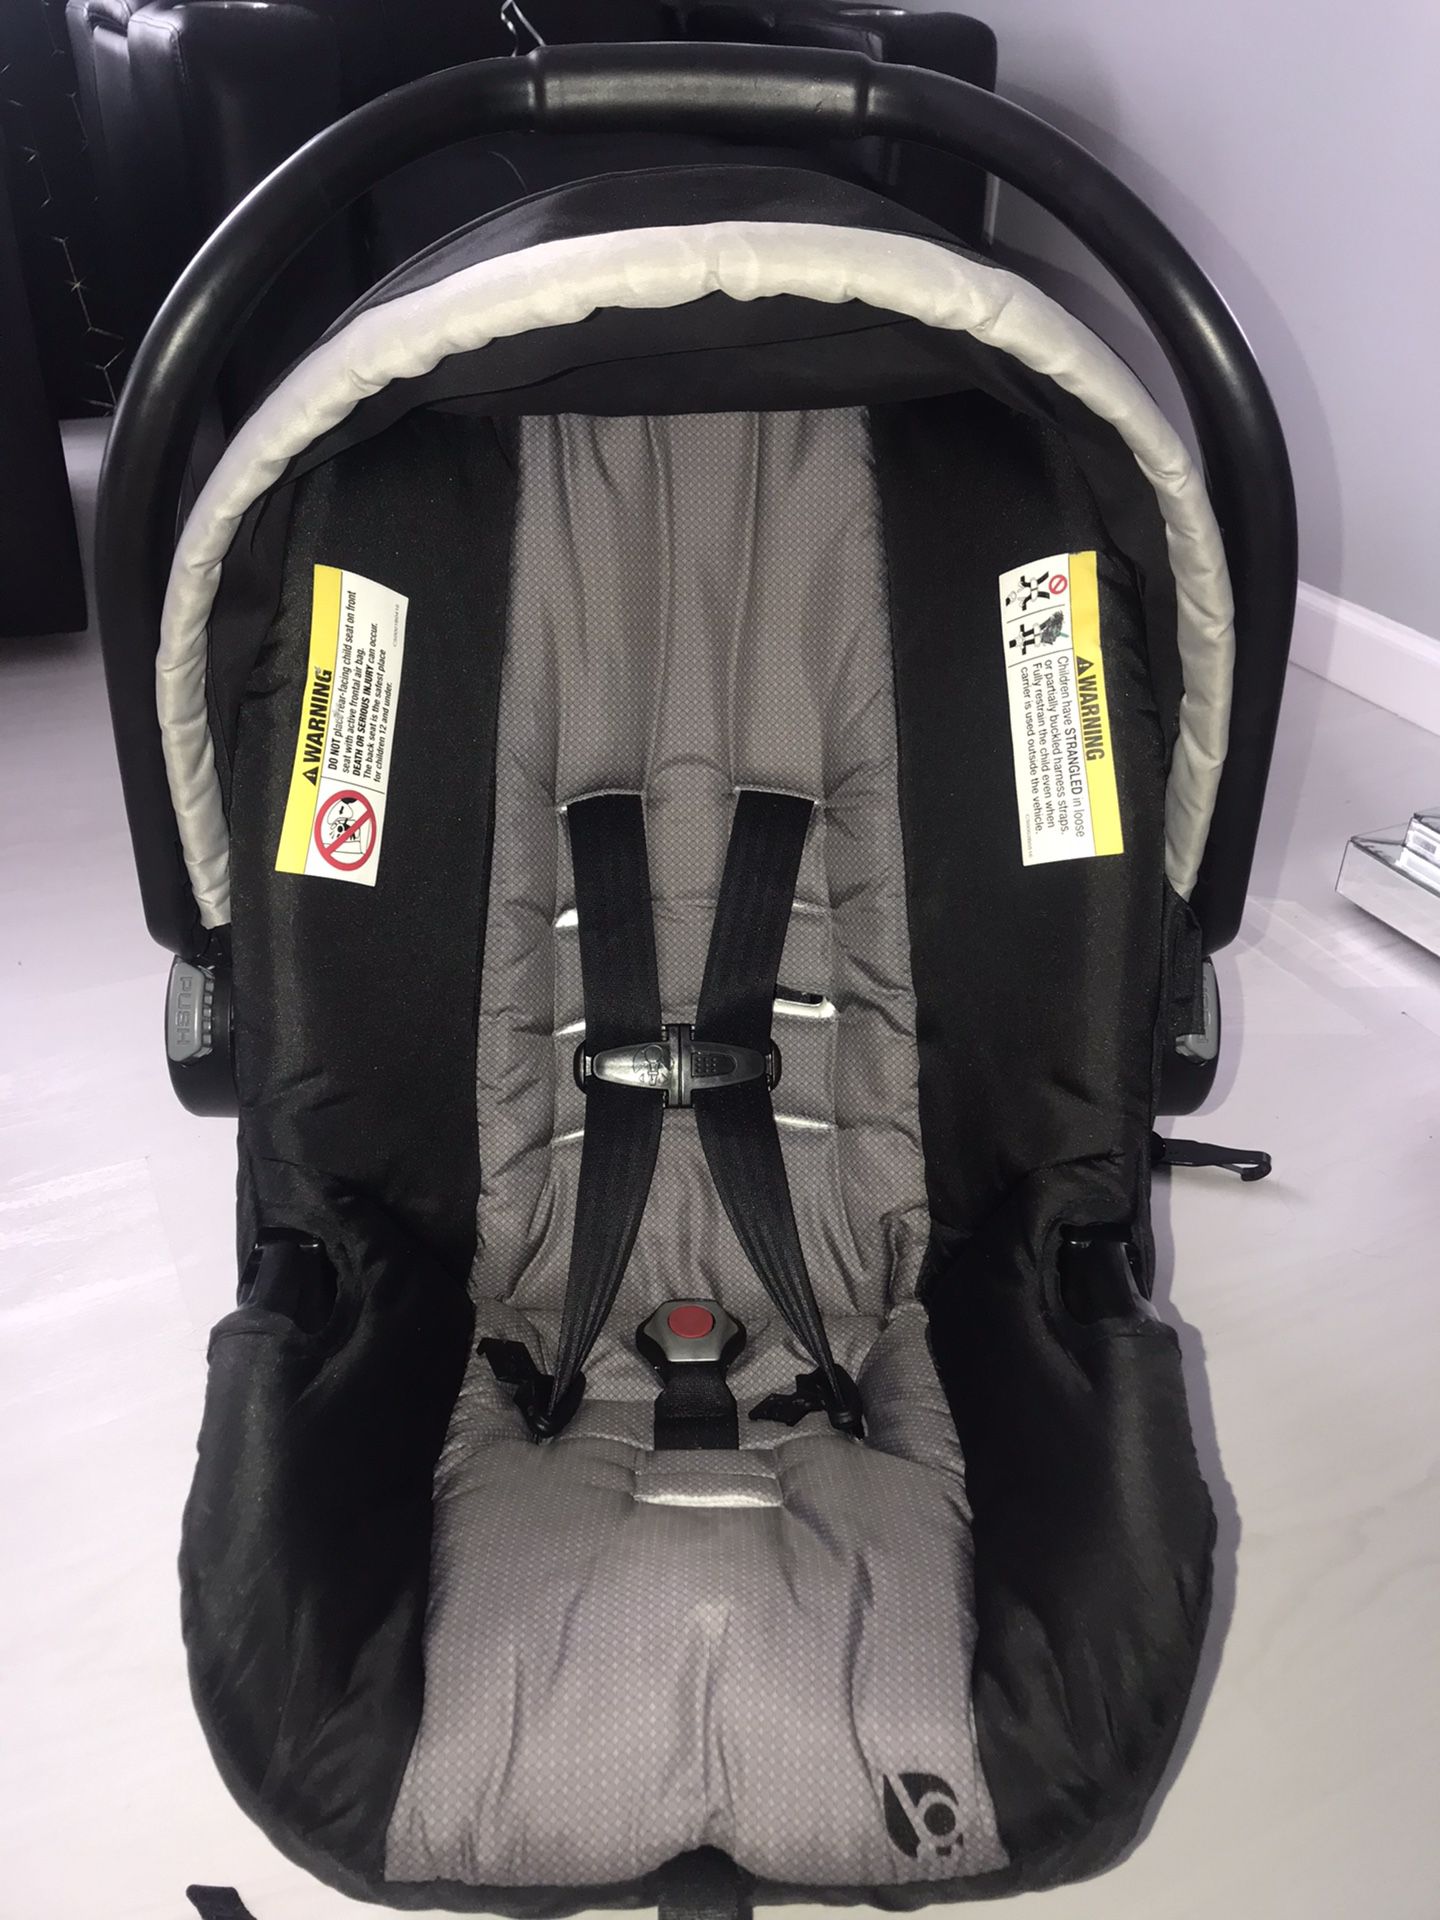 Baby Trend infant car seat